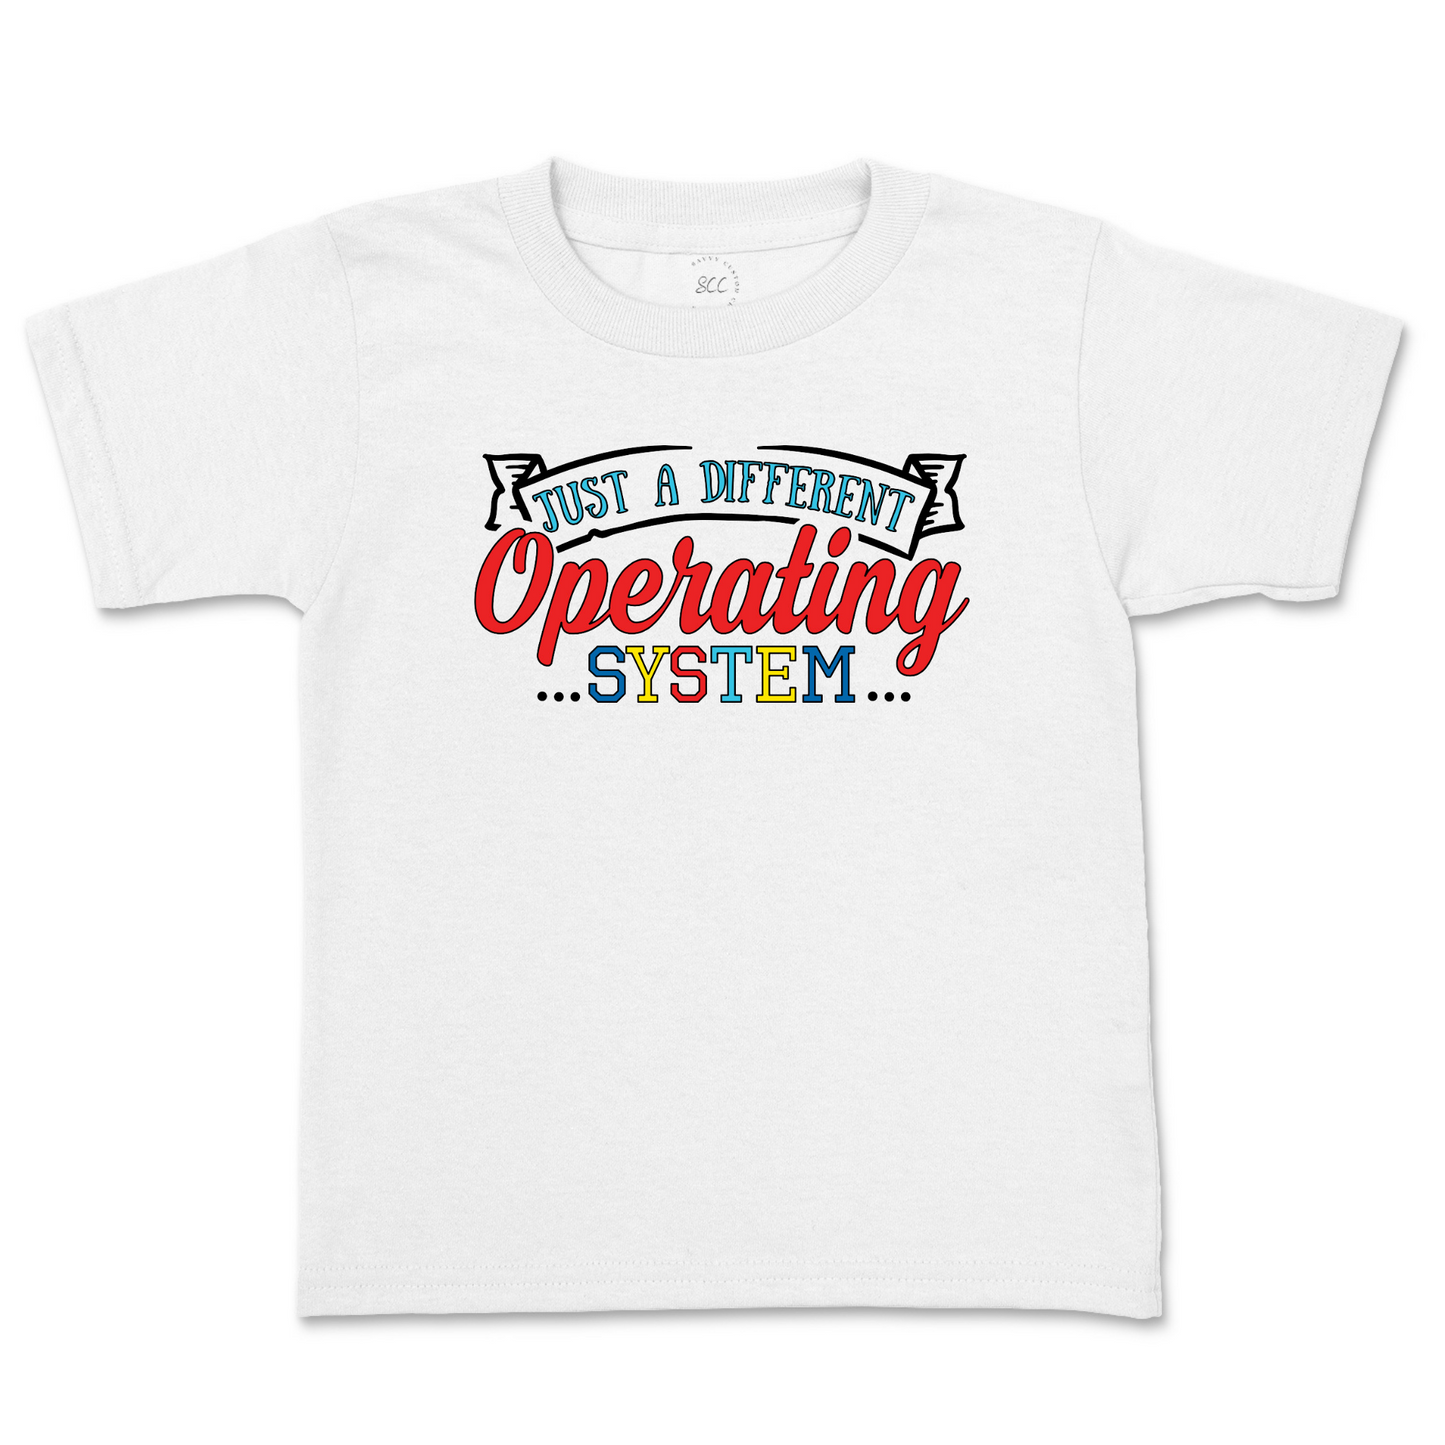 JUST A DIFFERENT OPERATING SYSTEM - Kids T-Shirt